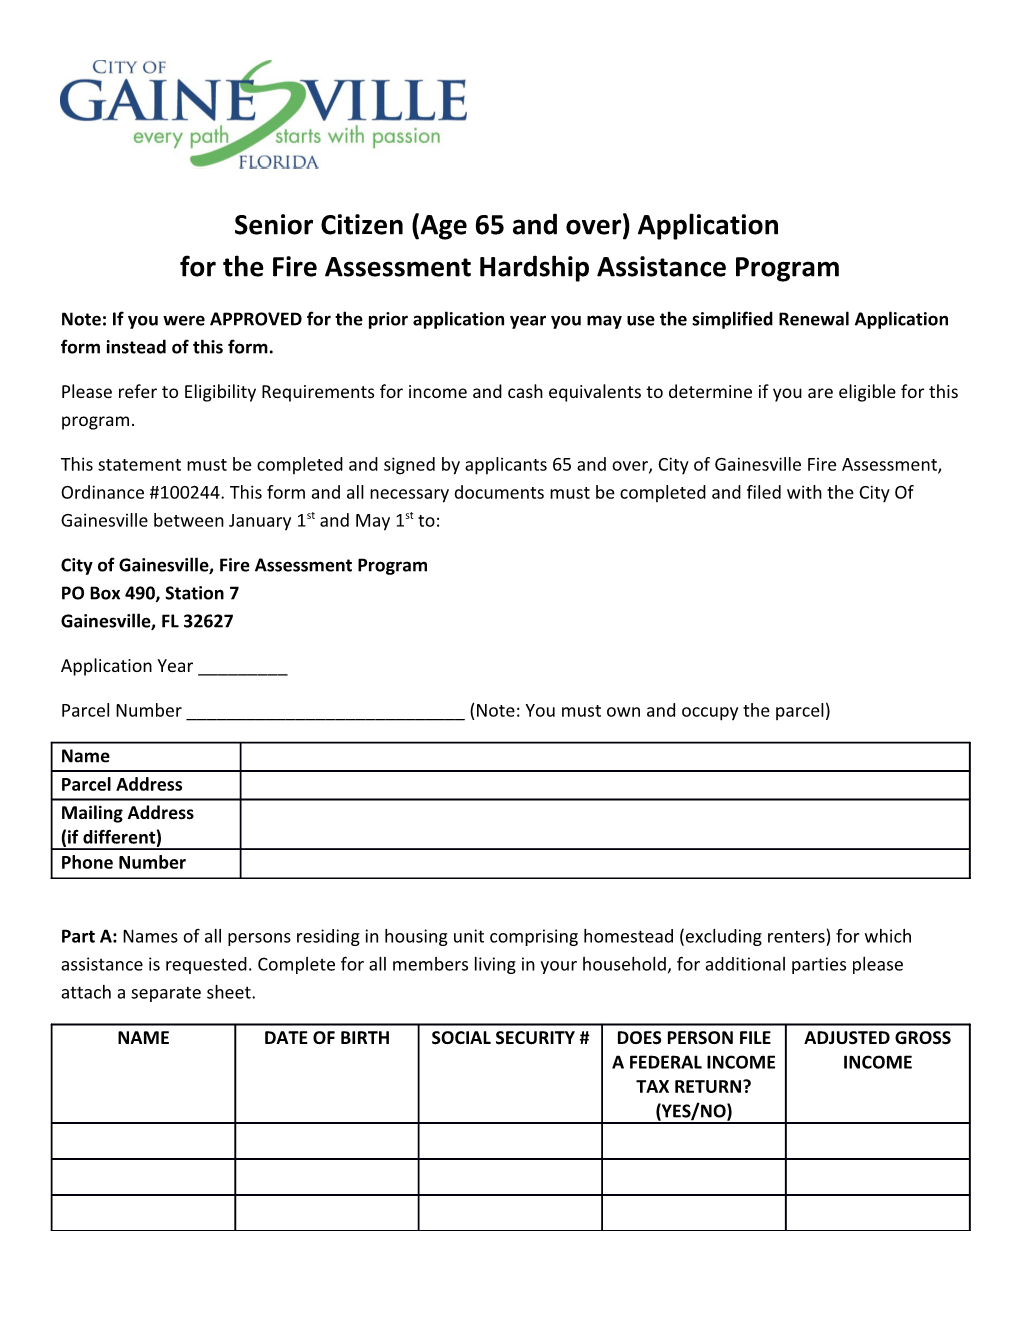 Senior Citizen (Age 65 and Over) Application for the Fire Assessment Hardship Assistance